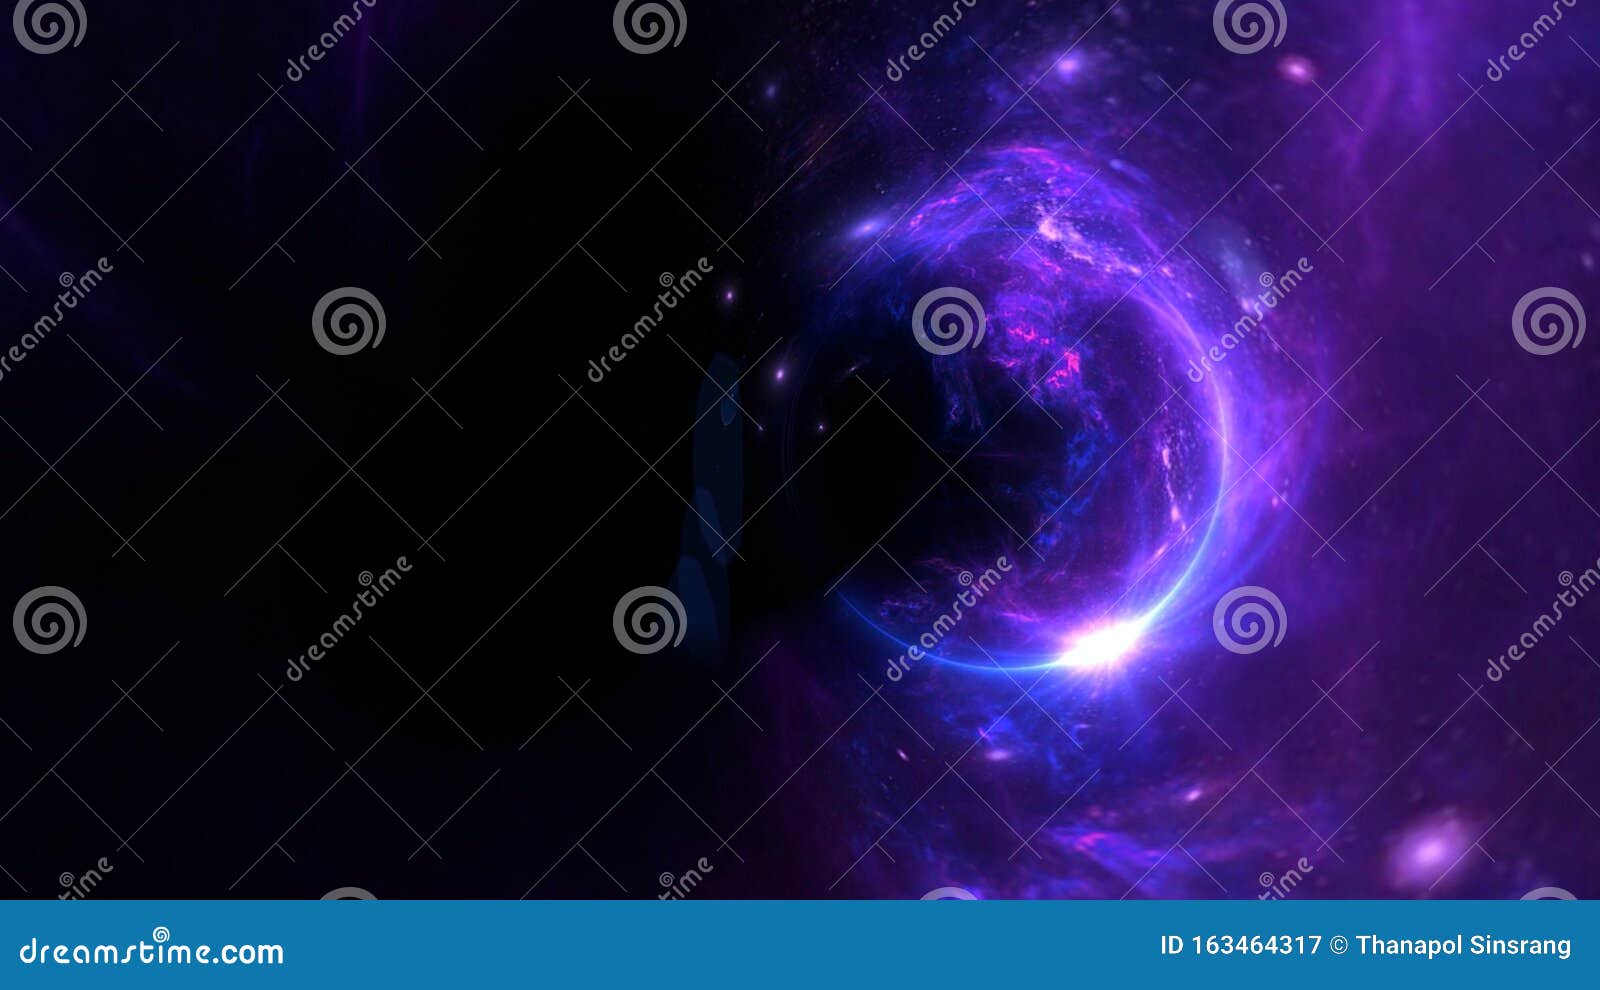 planets and galaxy, science fiction wallpaper. astronomy is the scientific study of the universe stars, planets, galaxies, and eve